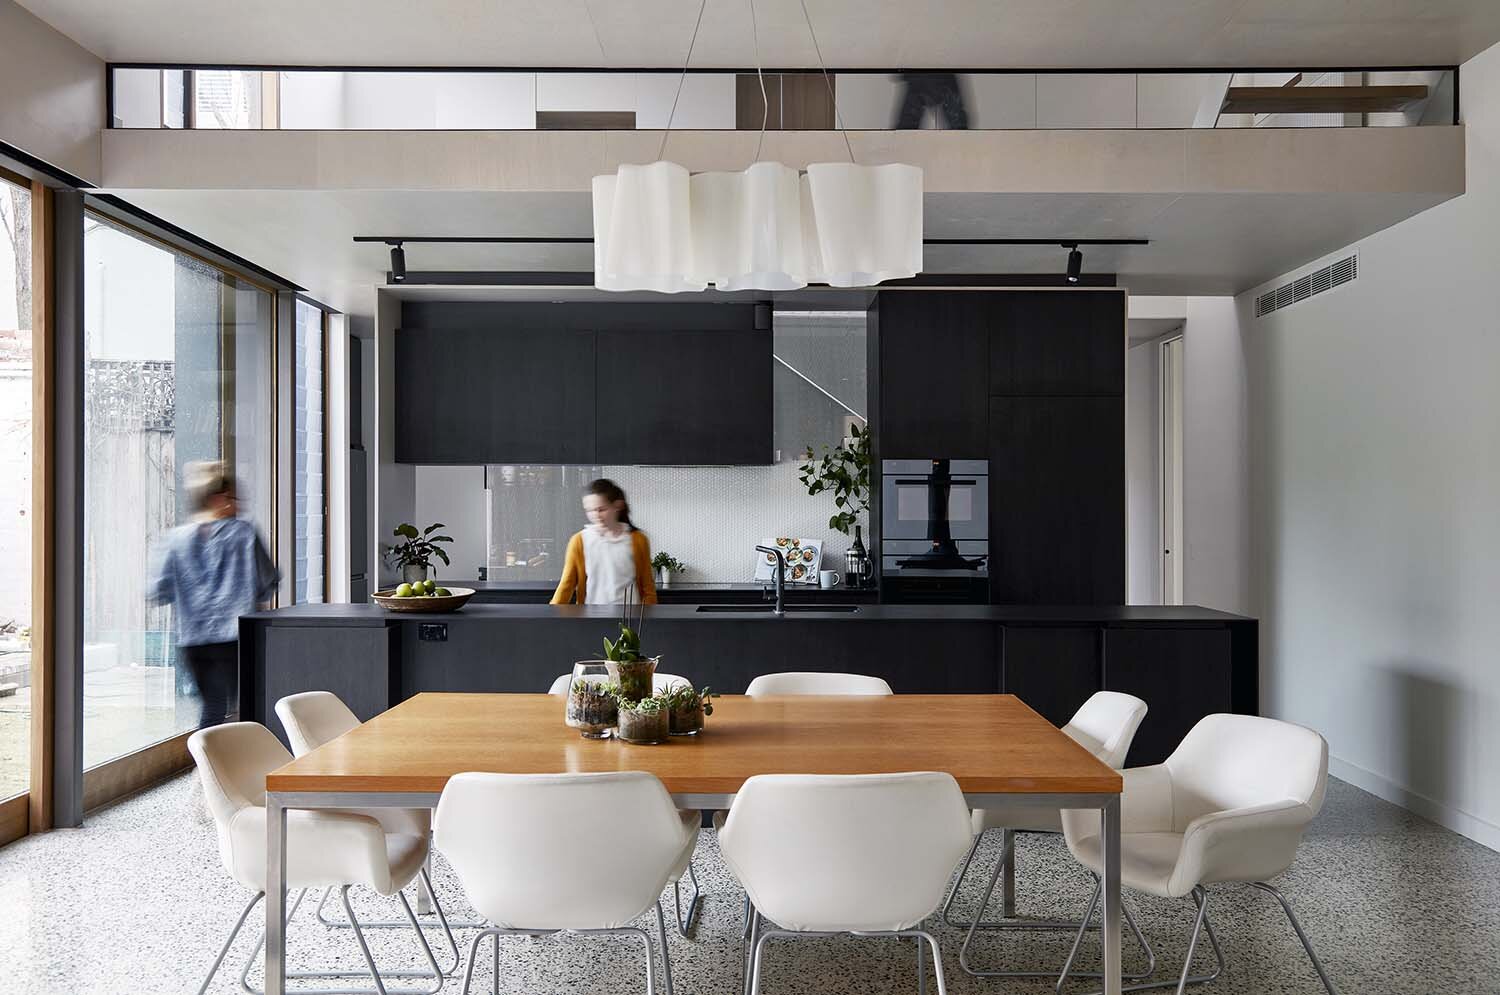 interact-house-armadale-renovation-by-warc-studio-architects020.jpg